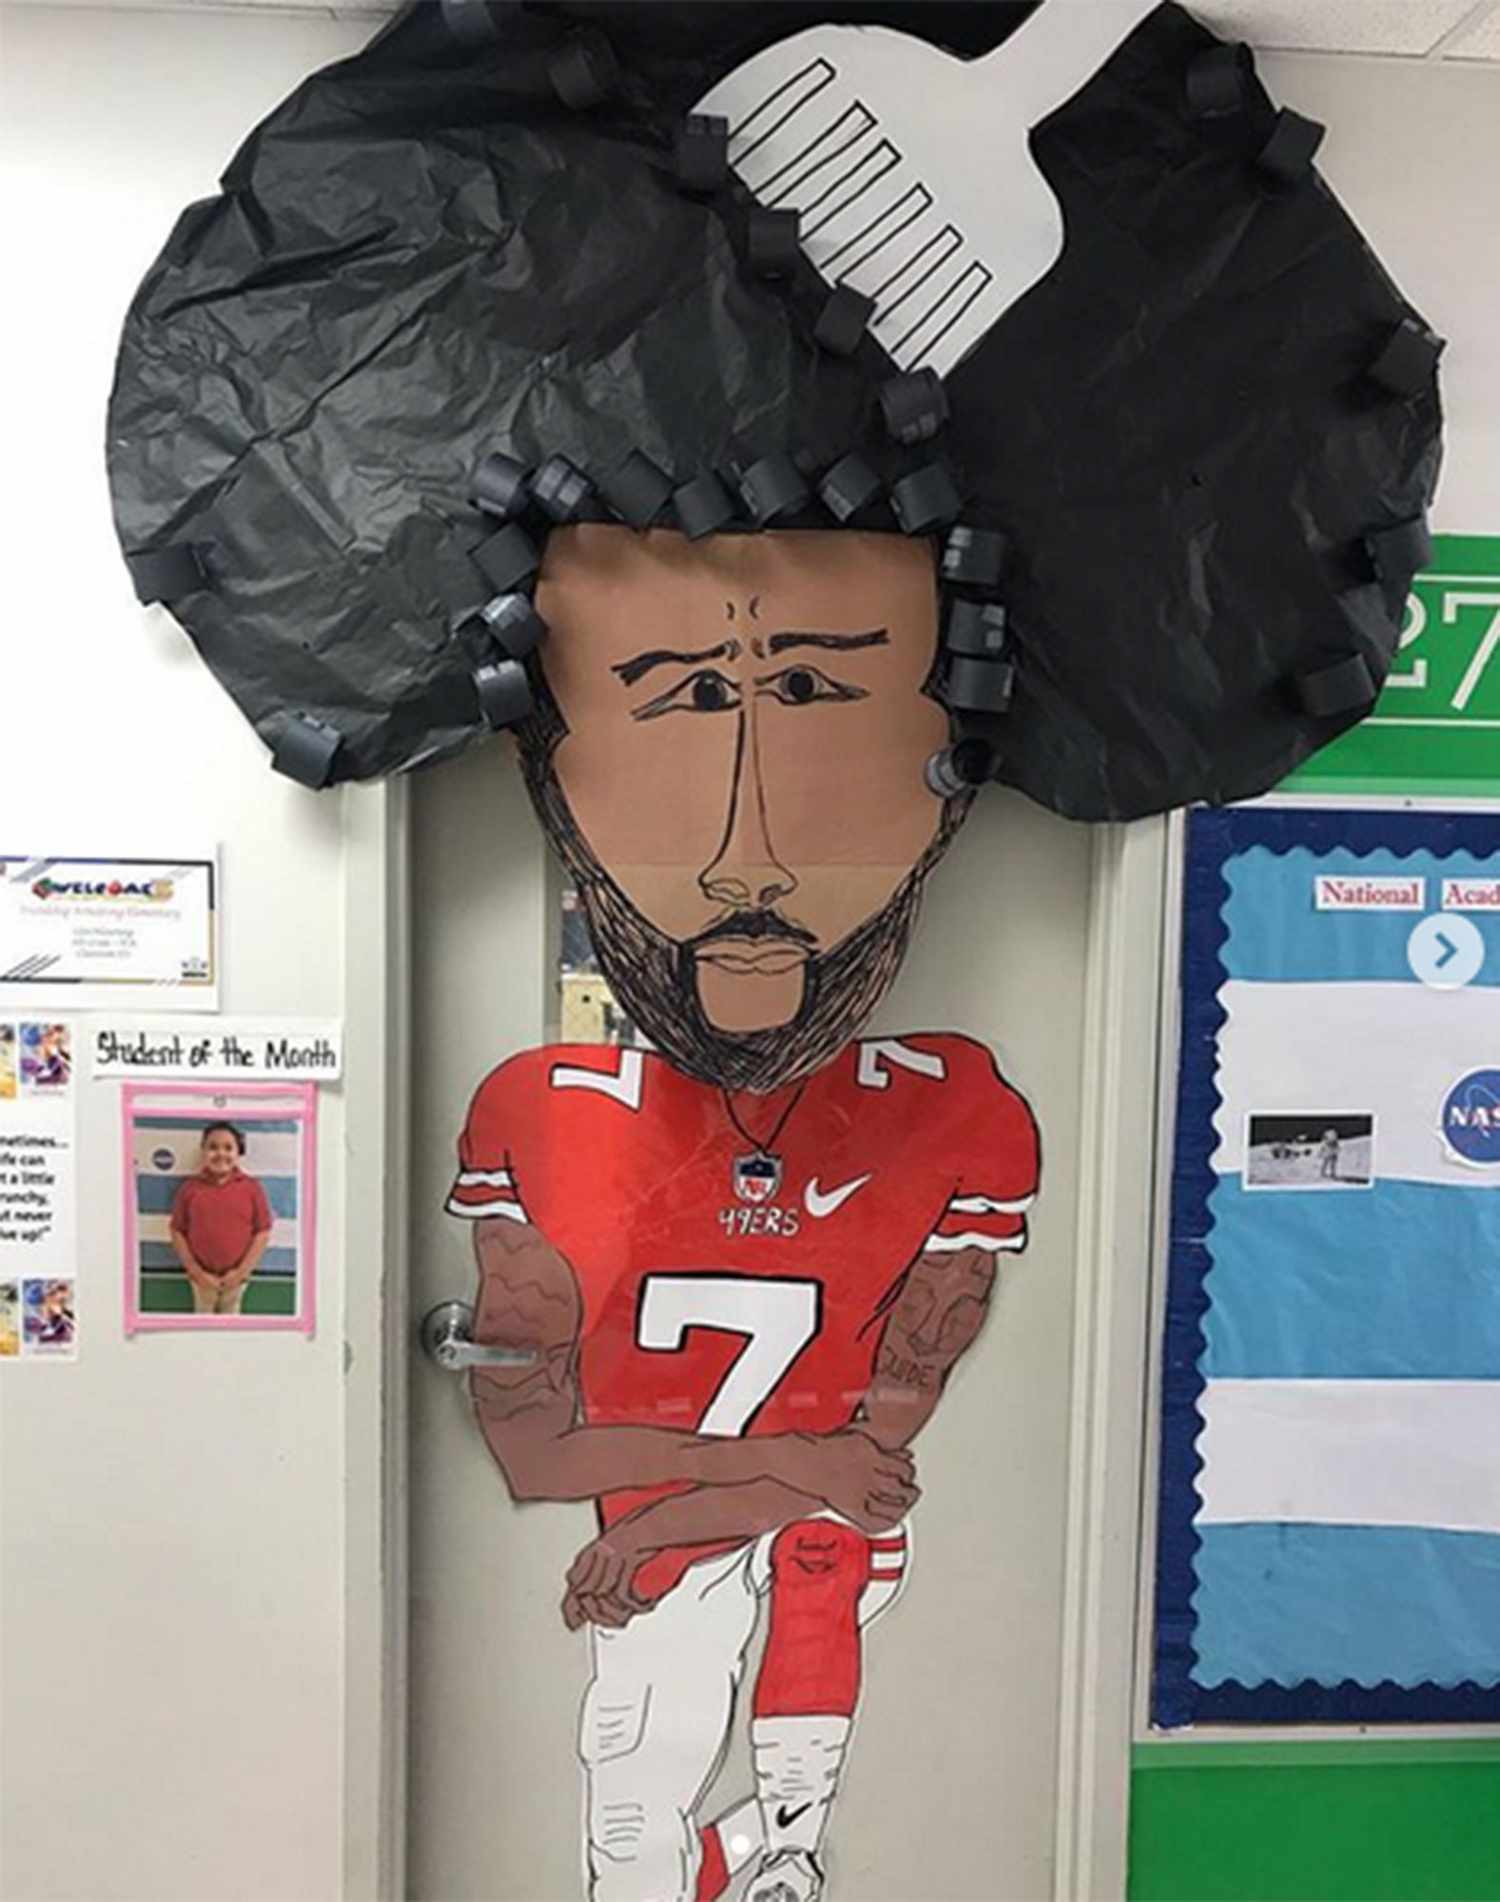 Teachers Take Door-Decorating for Black History Month | PEOPLE.com